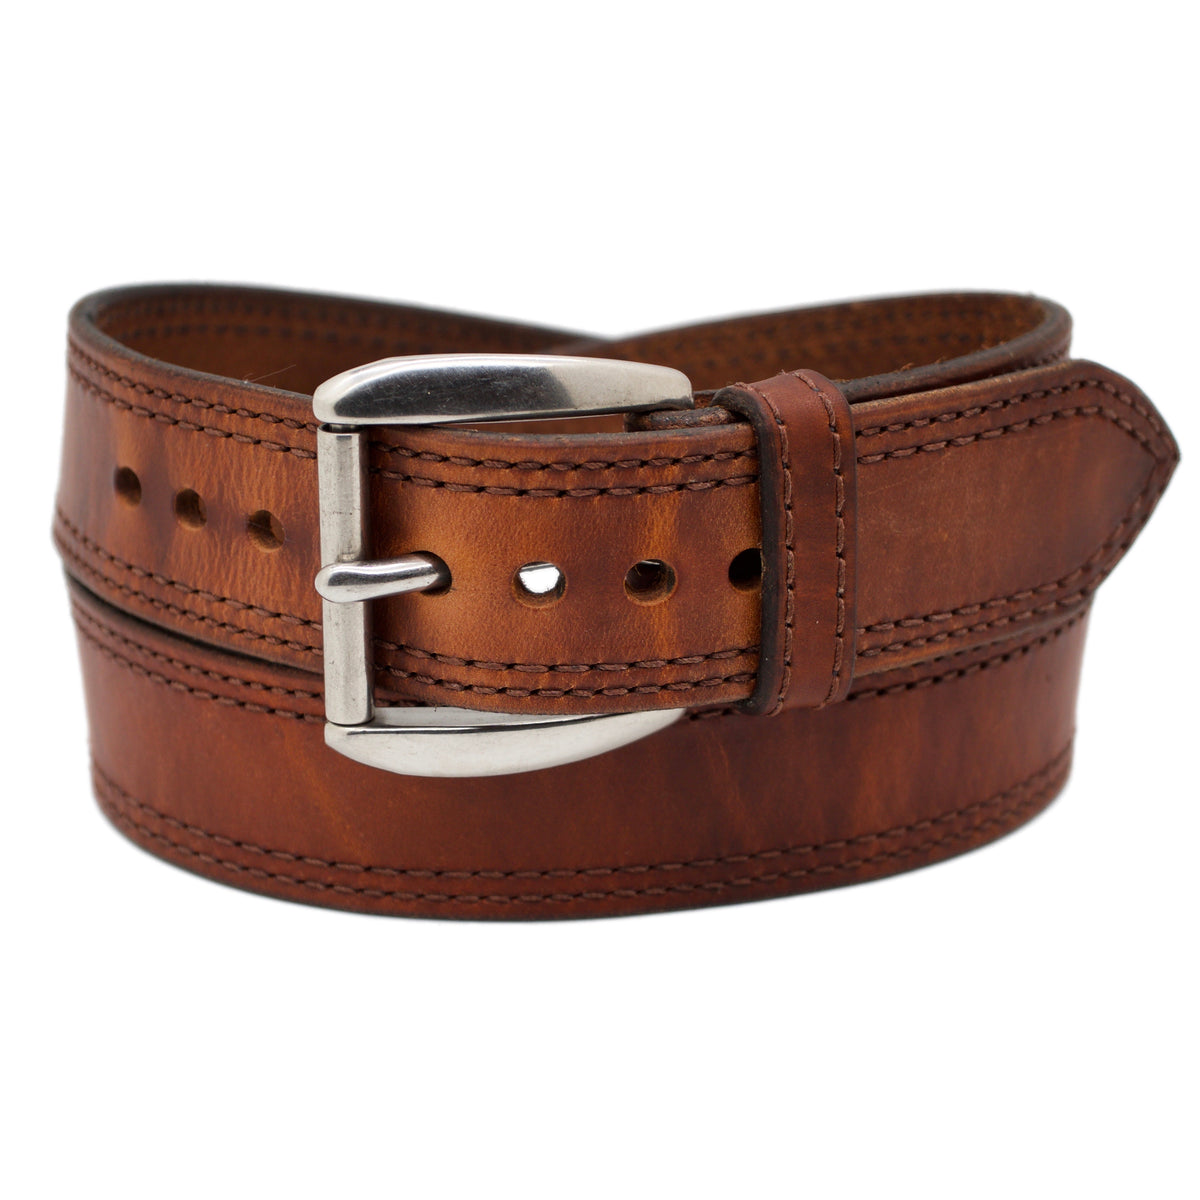 The COPPERHEAD WIDE 1.75 Leather Belt